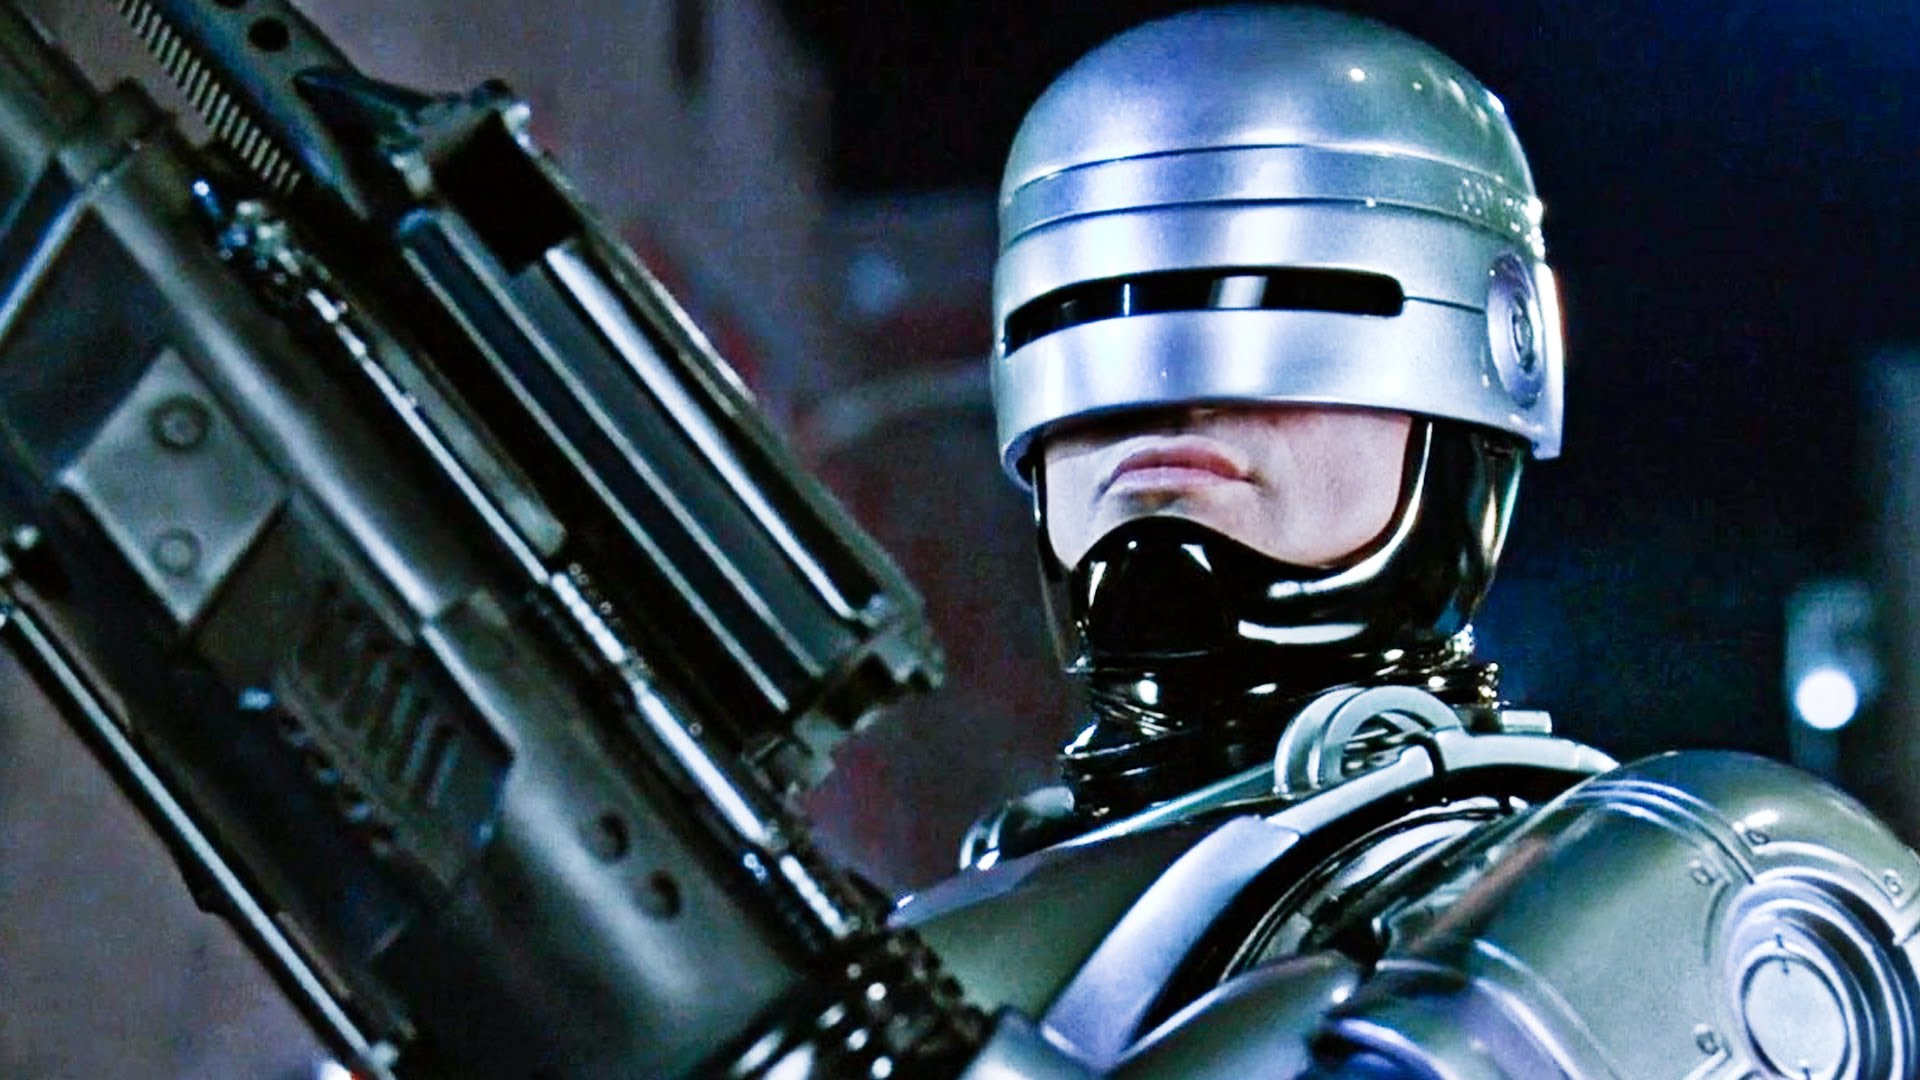 Robocop:
Takes place in Detroit, but various points in the chase at the beginning show a 

section of the Dallas skyline.